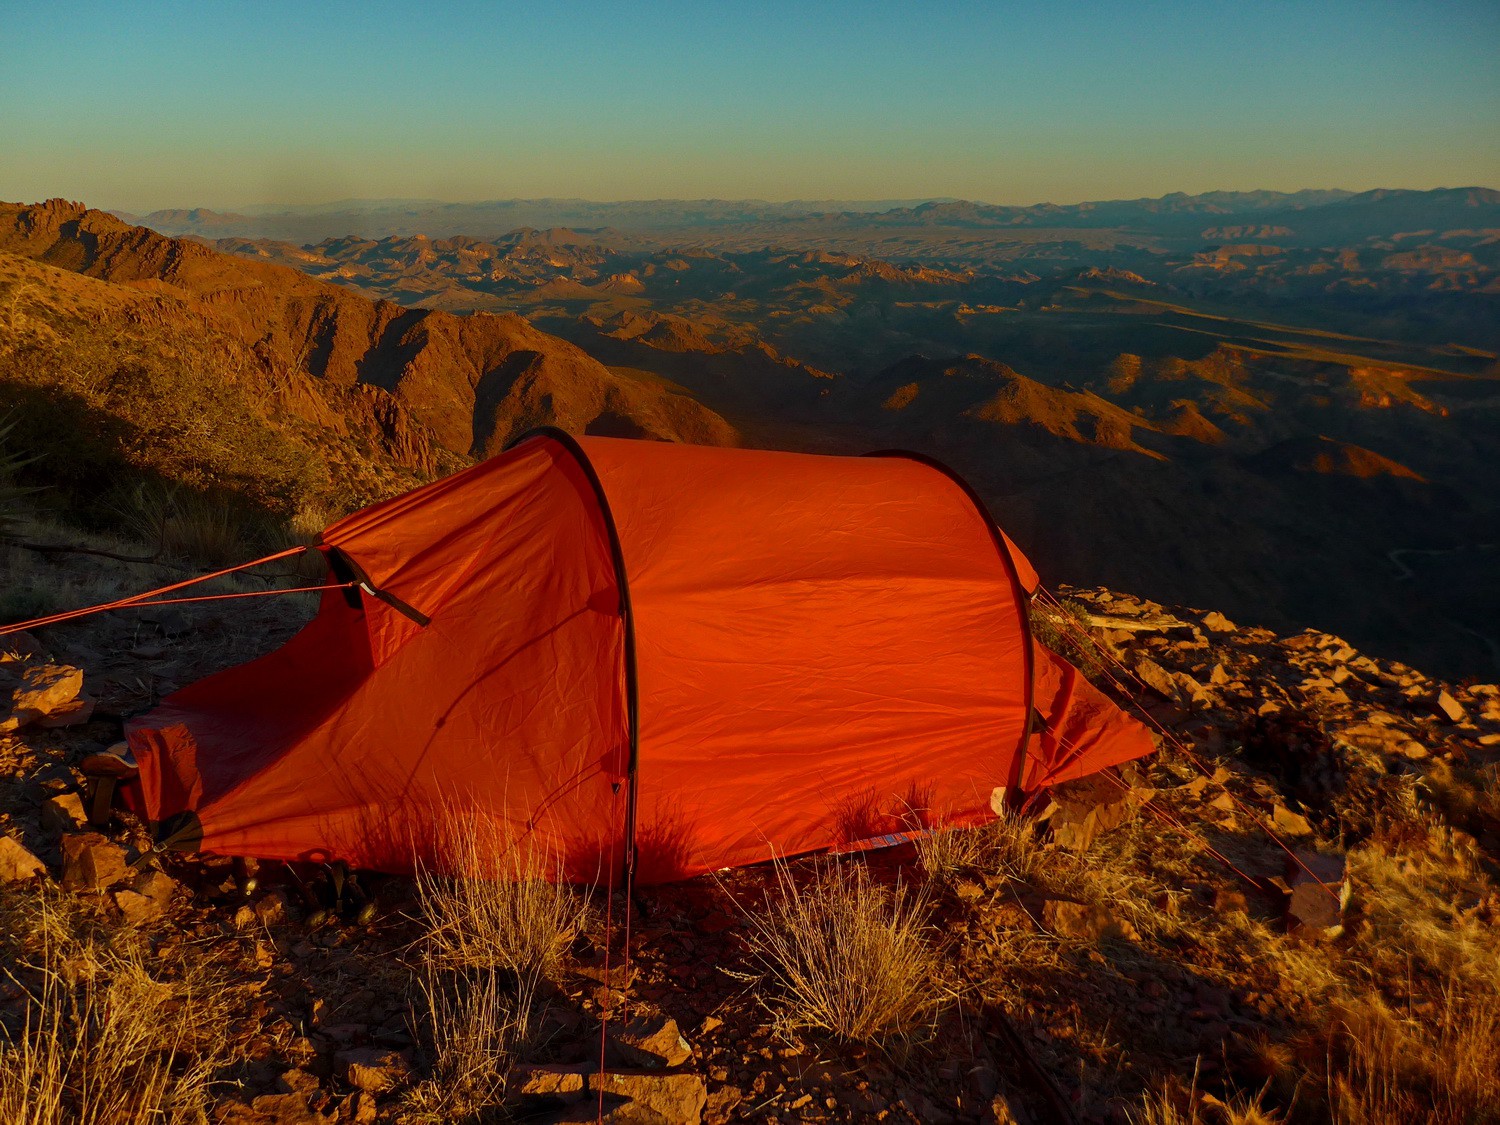 Our tent at sunrise